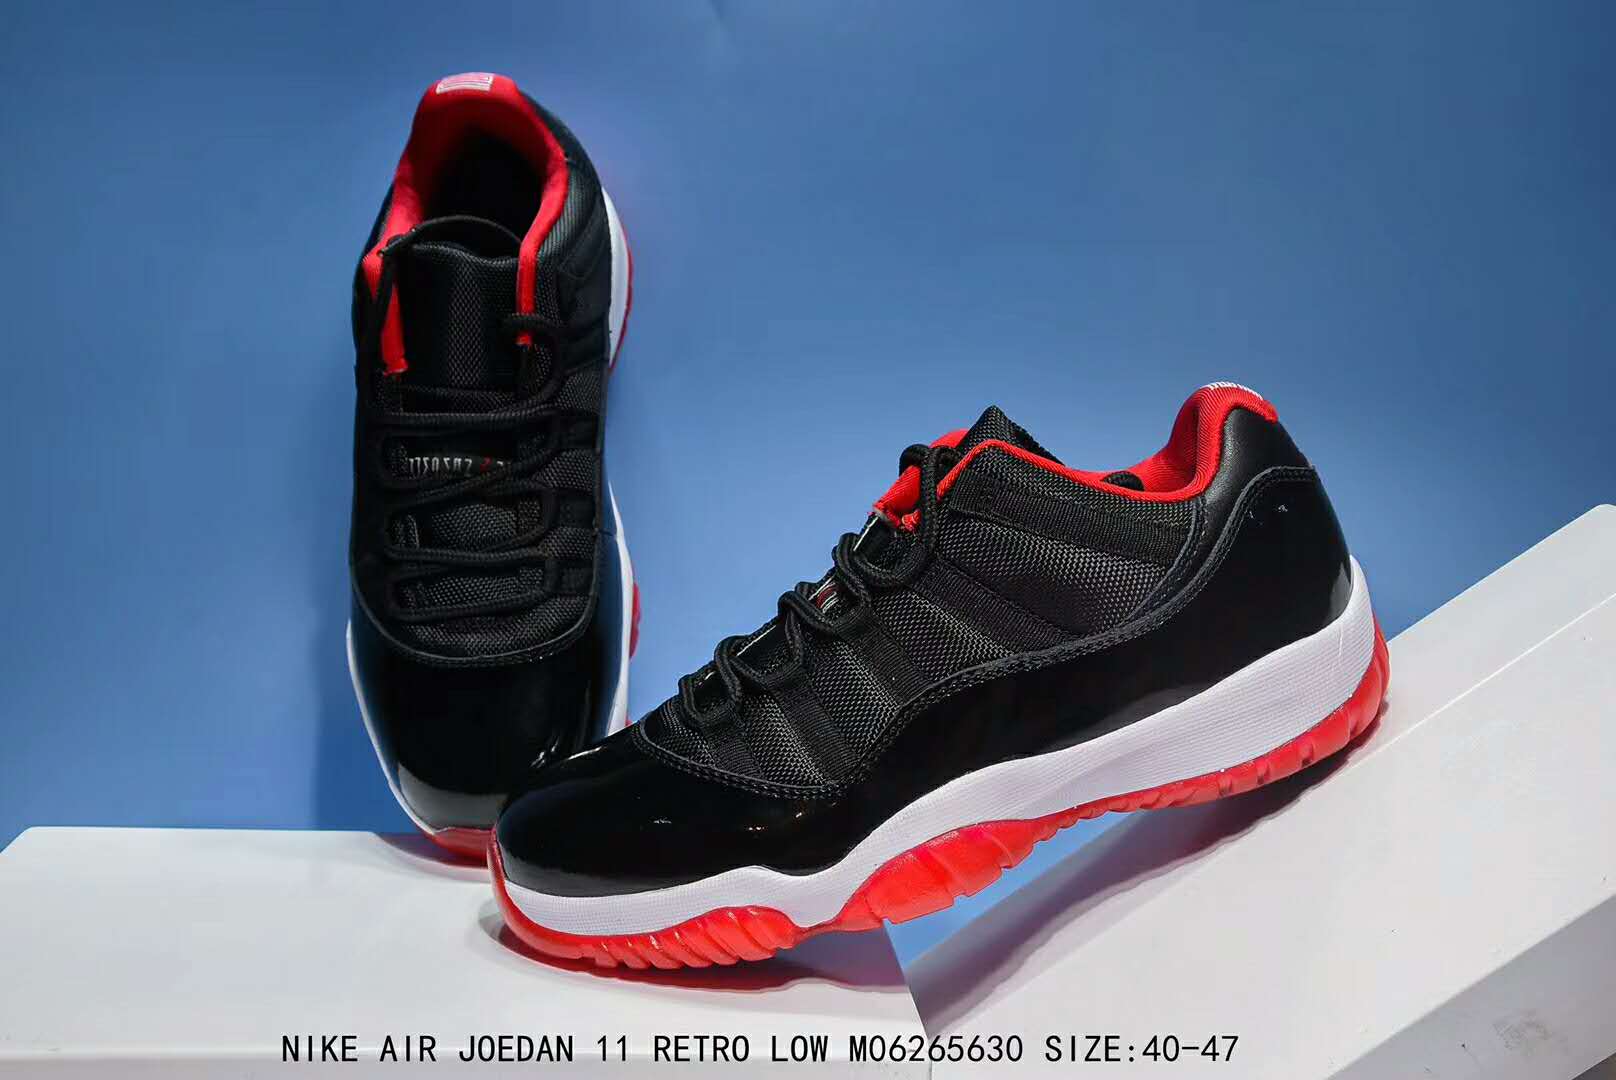 New Jordans 11 Low Suede Black Red Sole Basketball Shoes